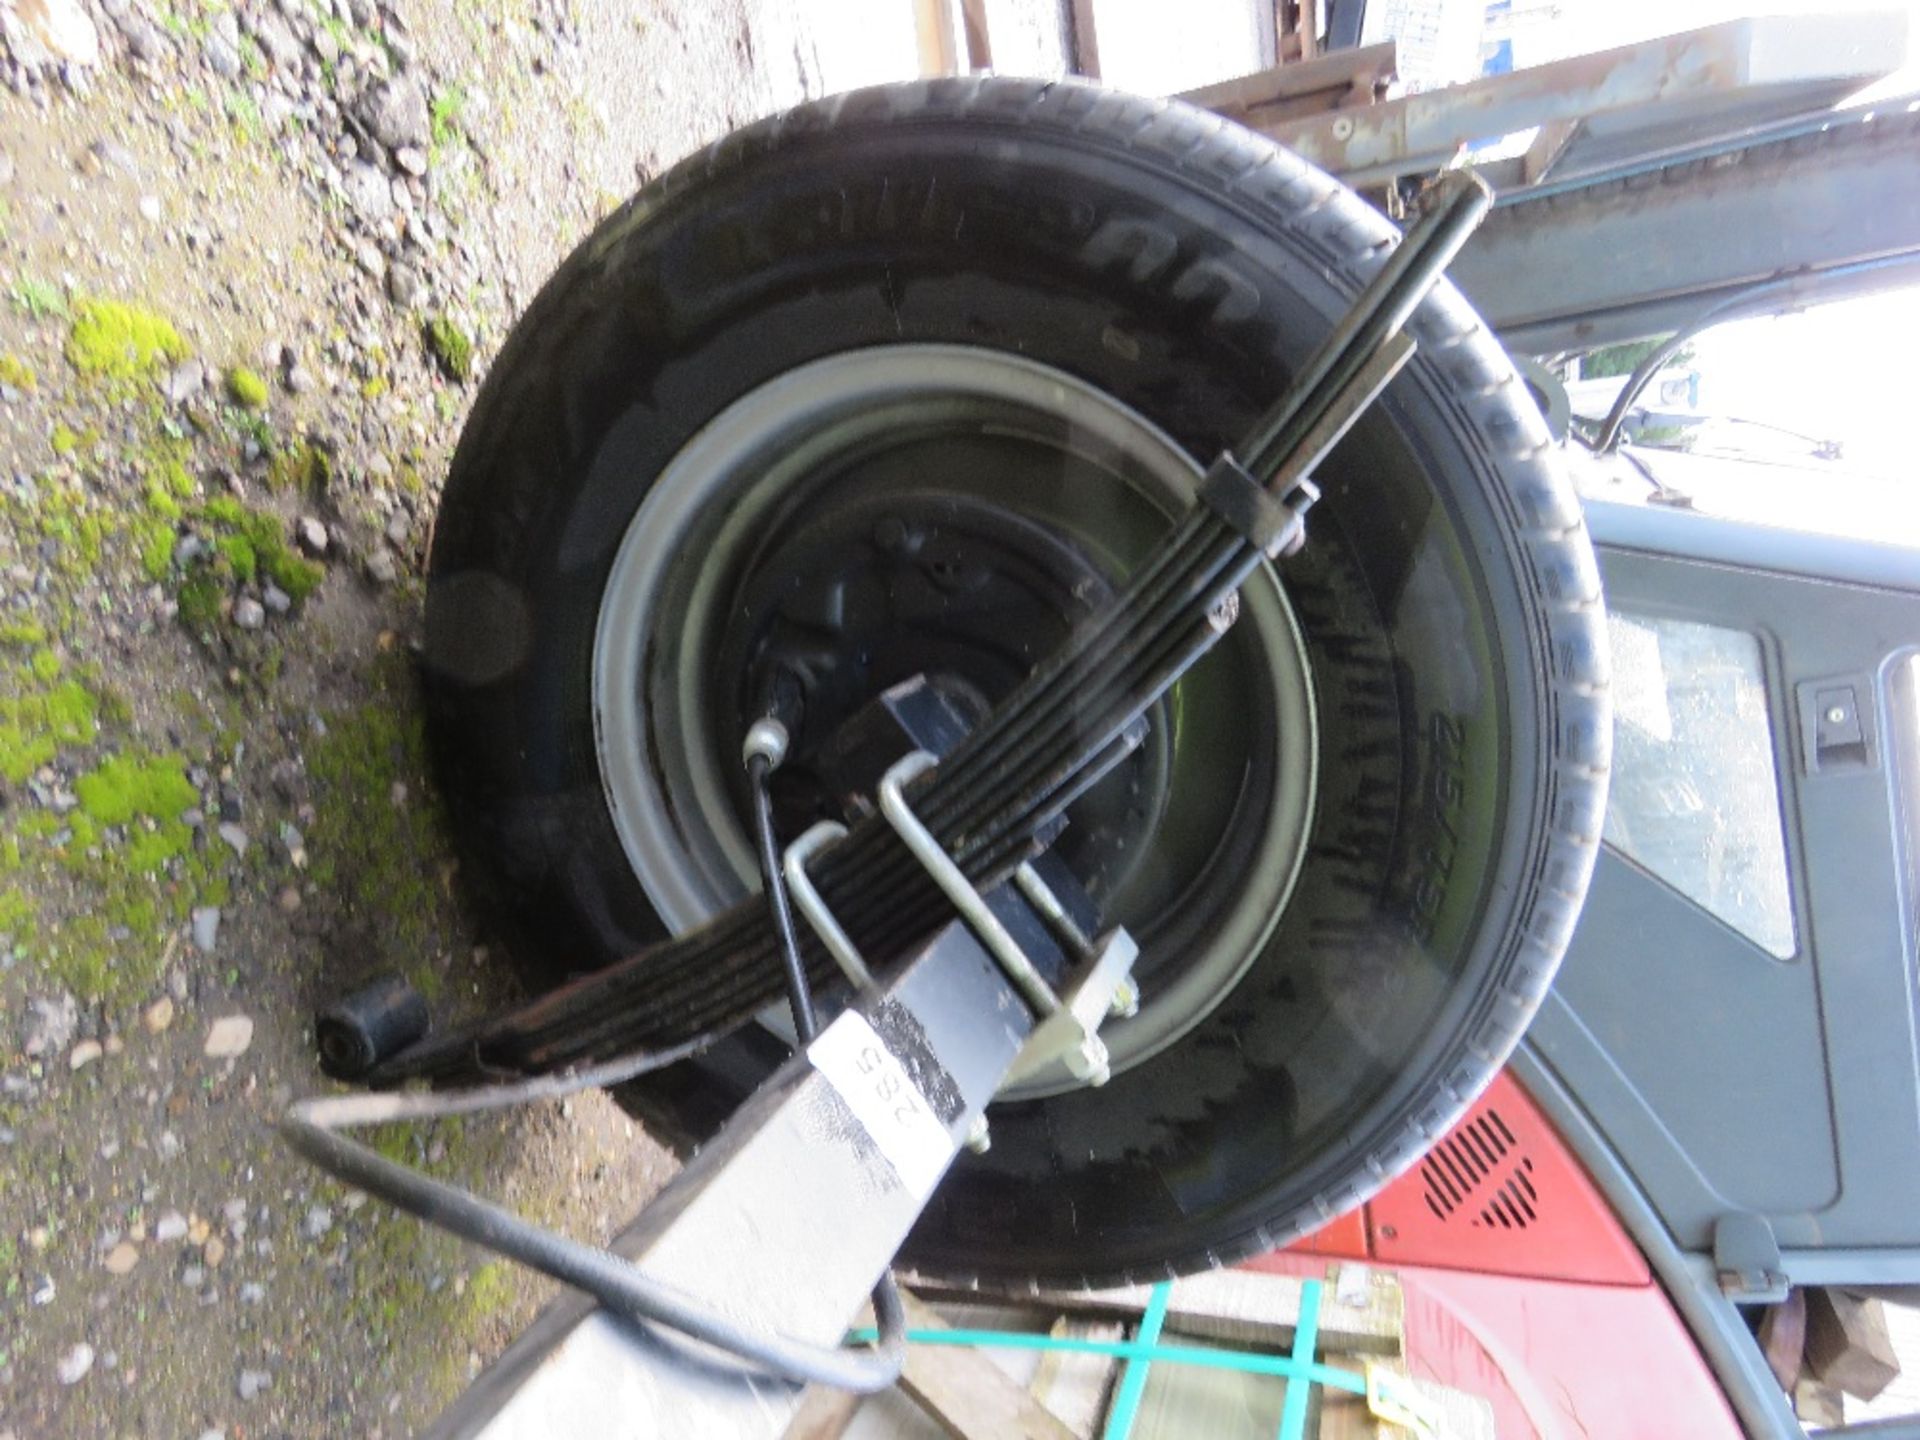 HEAVY DUTY TRAILER AXLE WITH SPINGS, BELIEVED TO BE OFF GROUNDHOG TYPE WELFARE UNIT?? ....THIS LOT I - Image 5 of 6